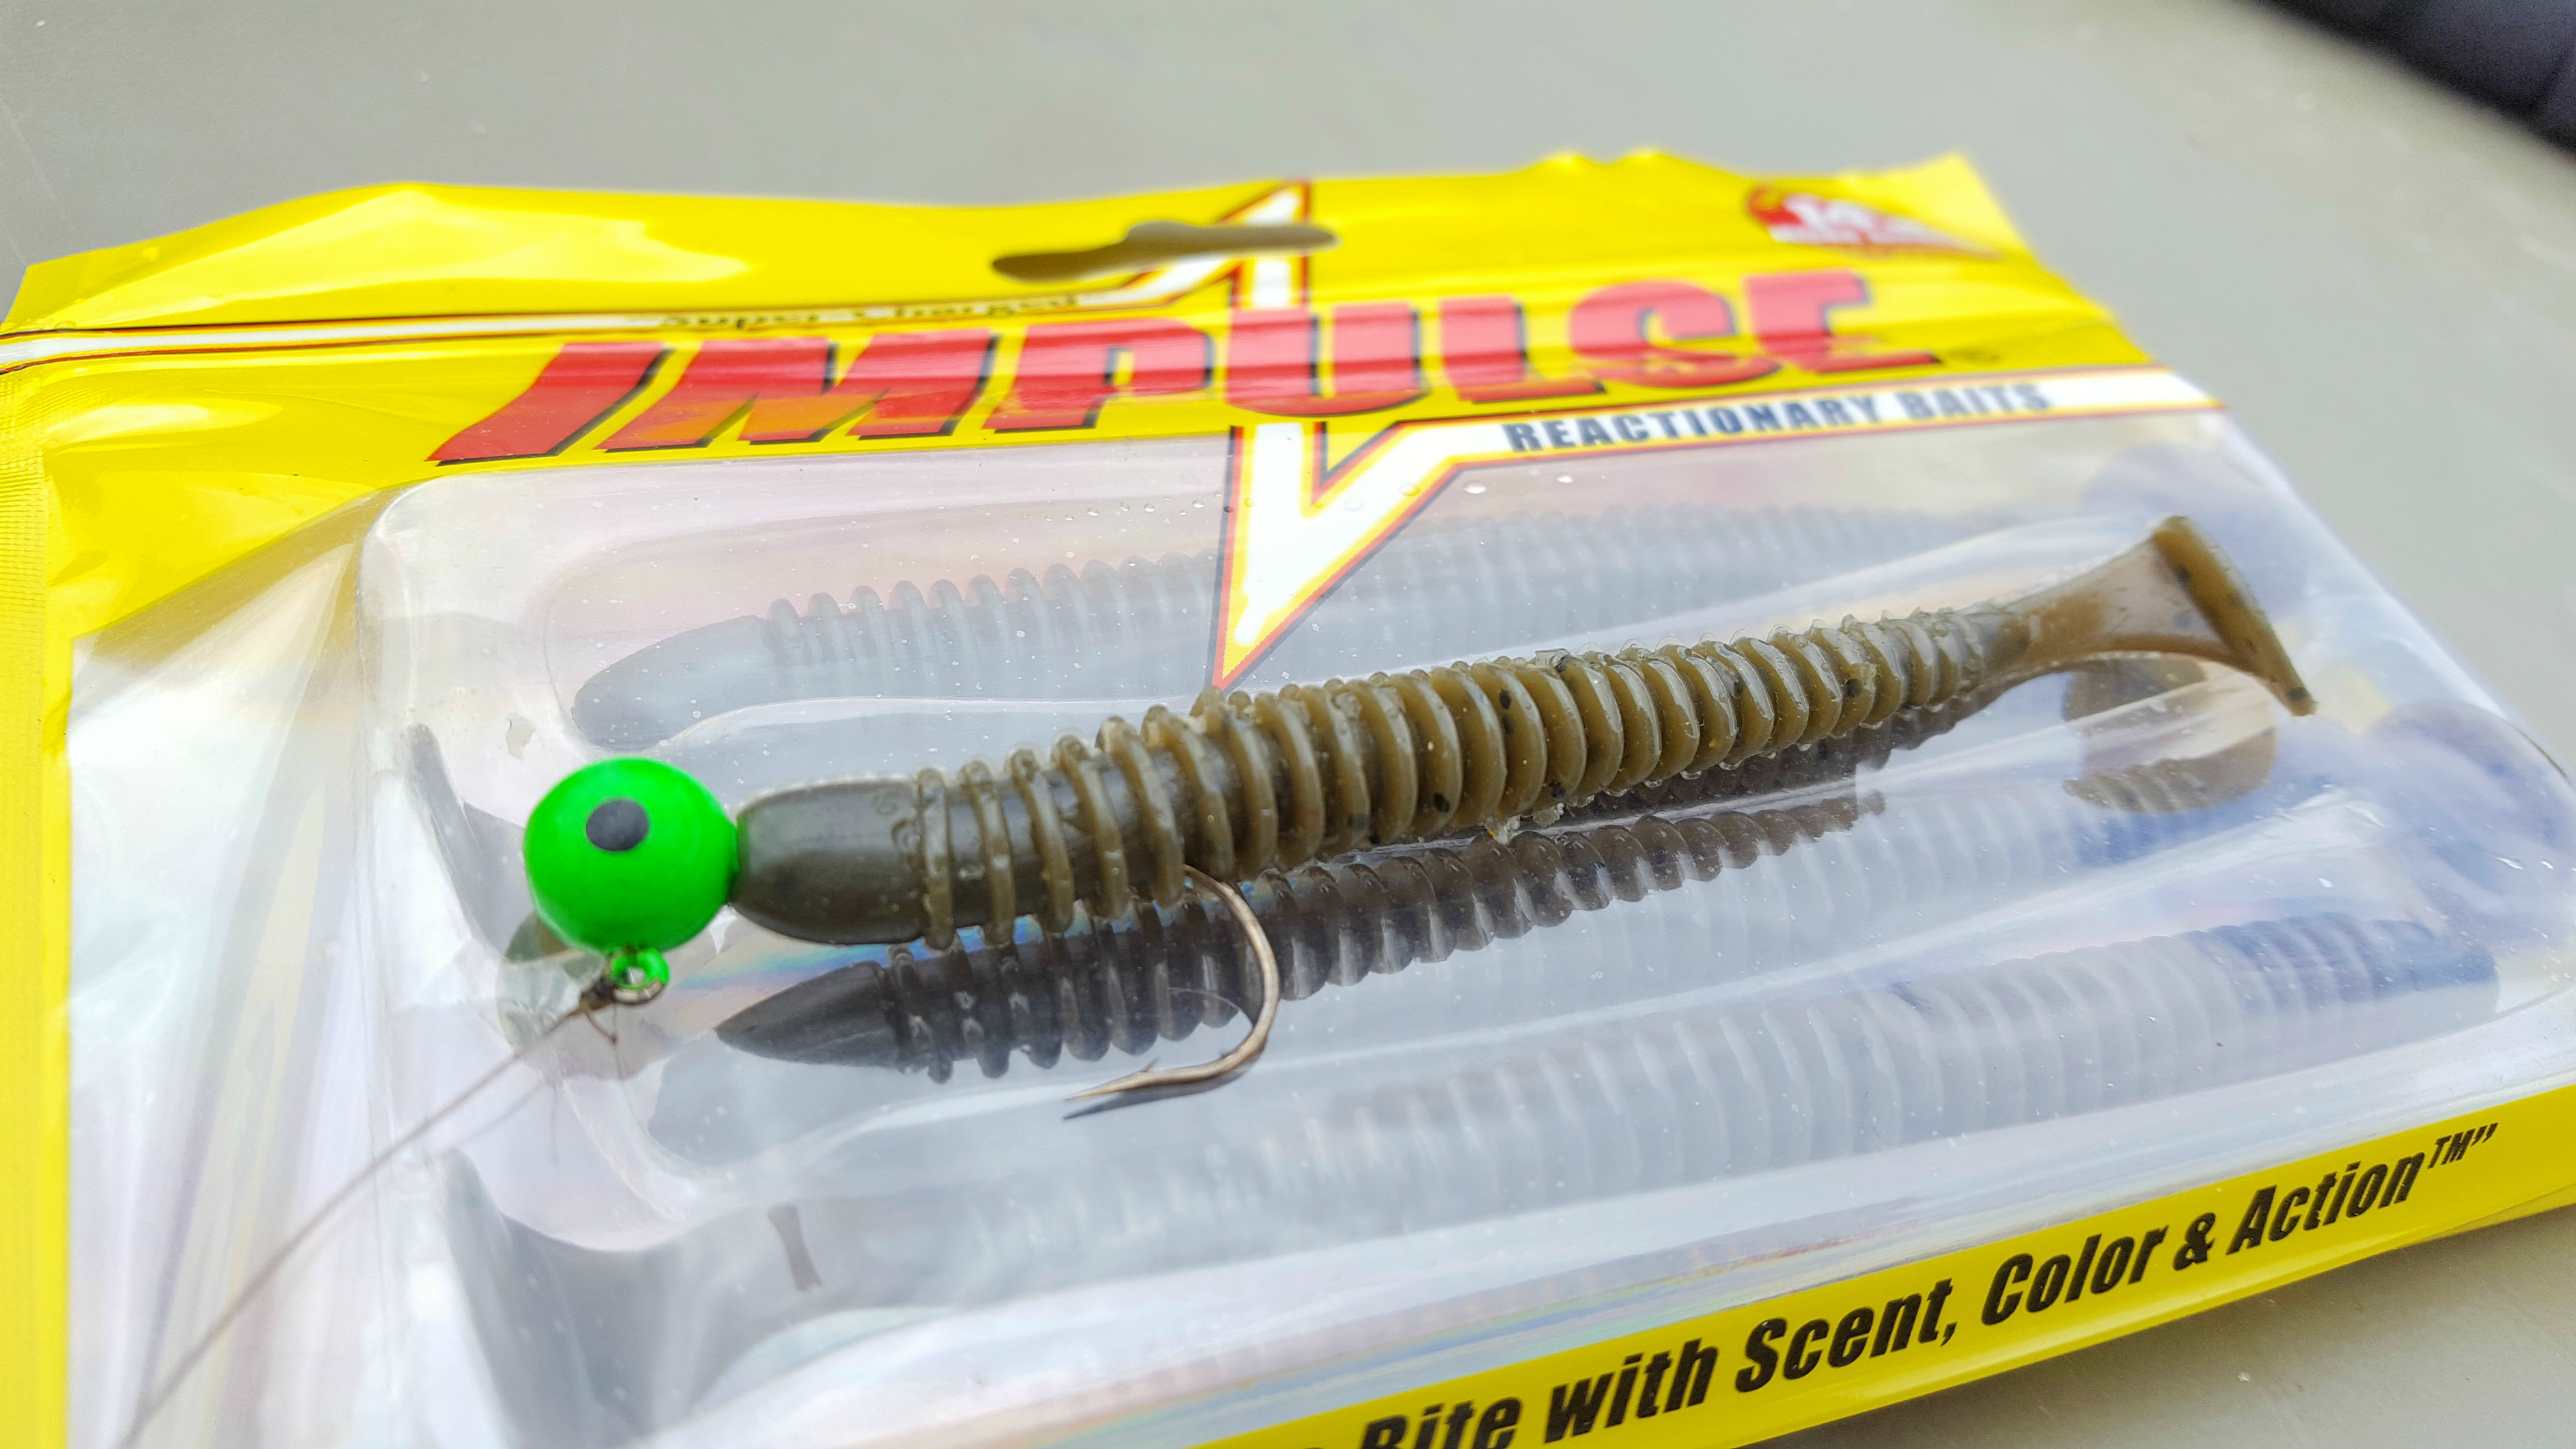 Northland Fishing Tackle Jig and Plastic combination.